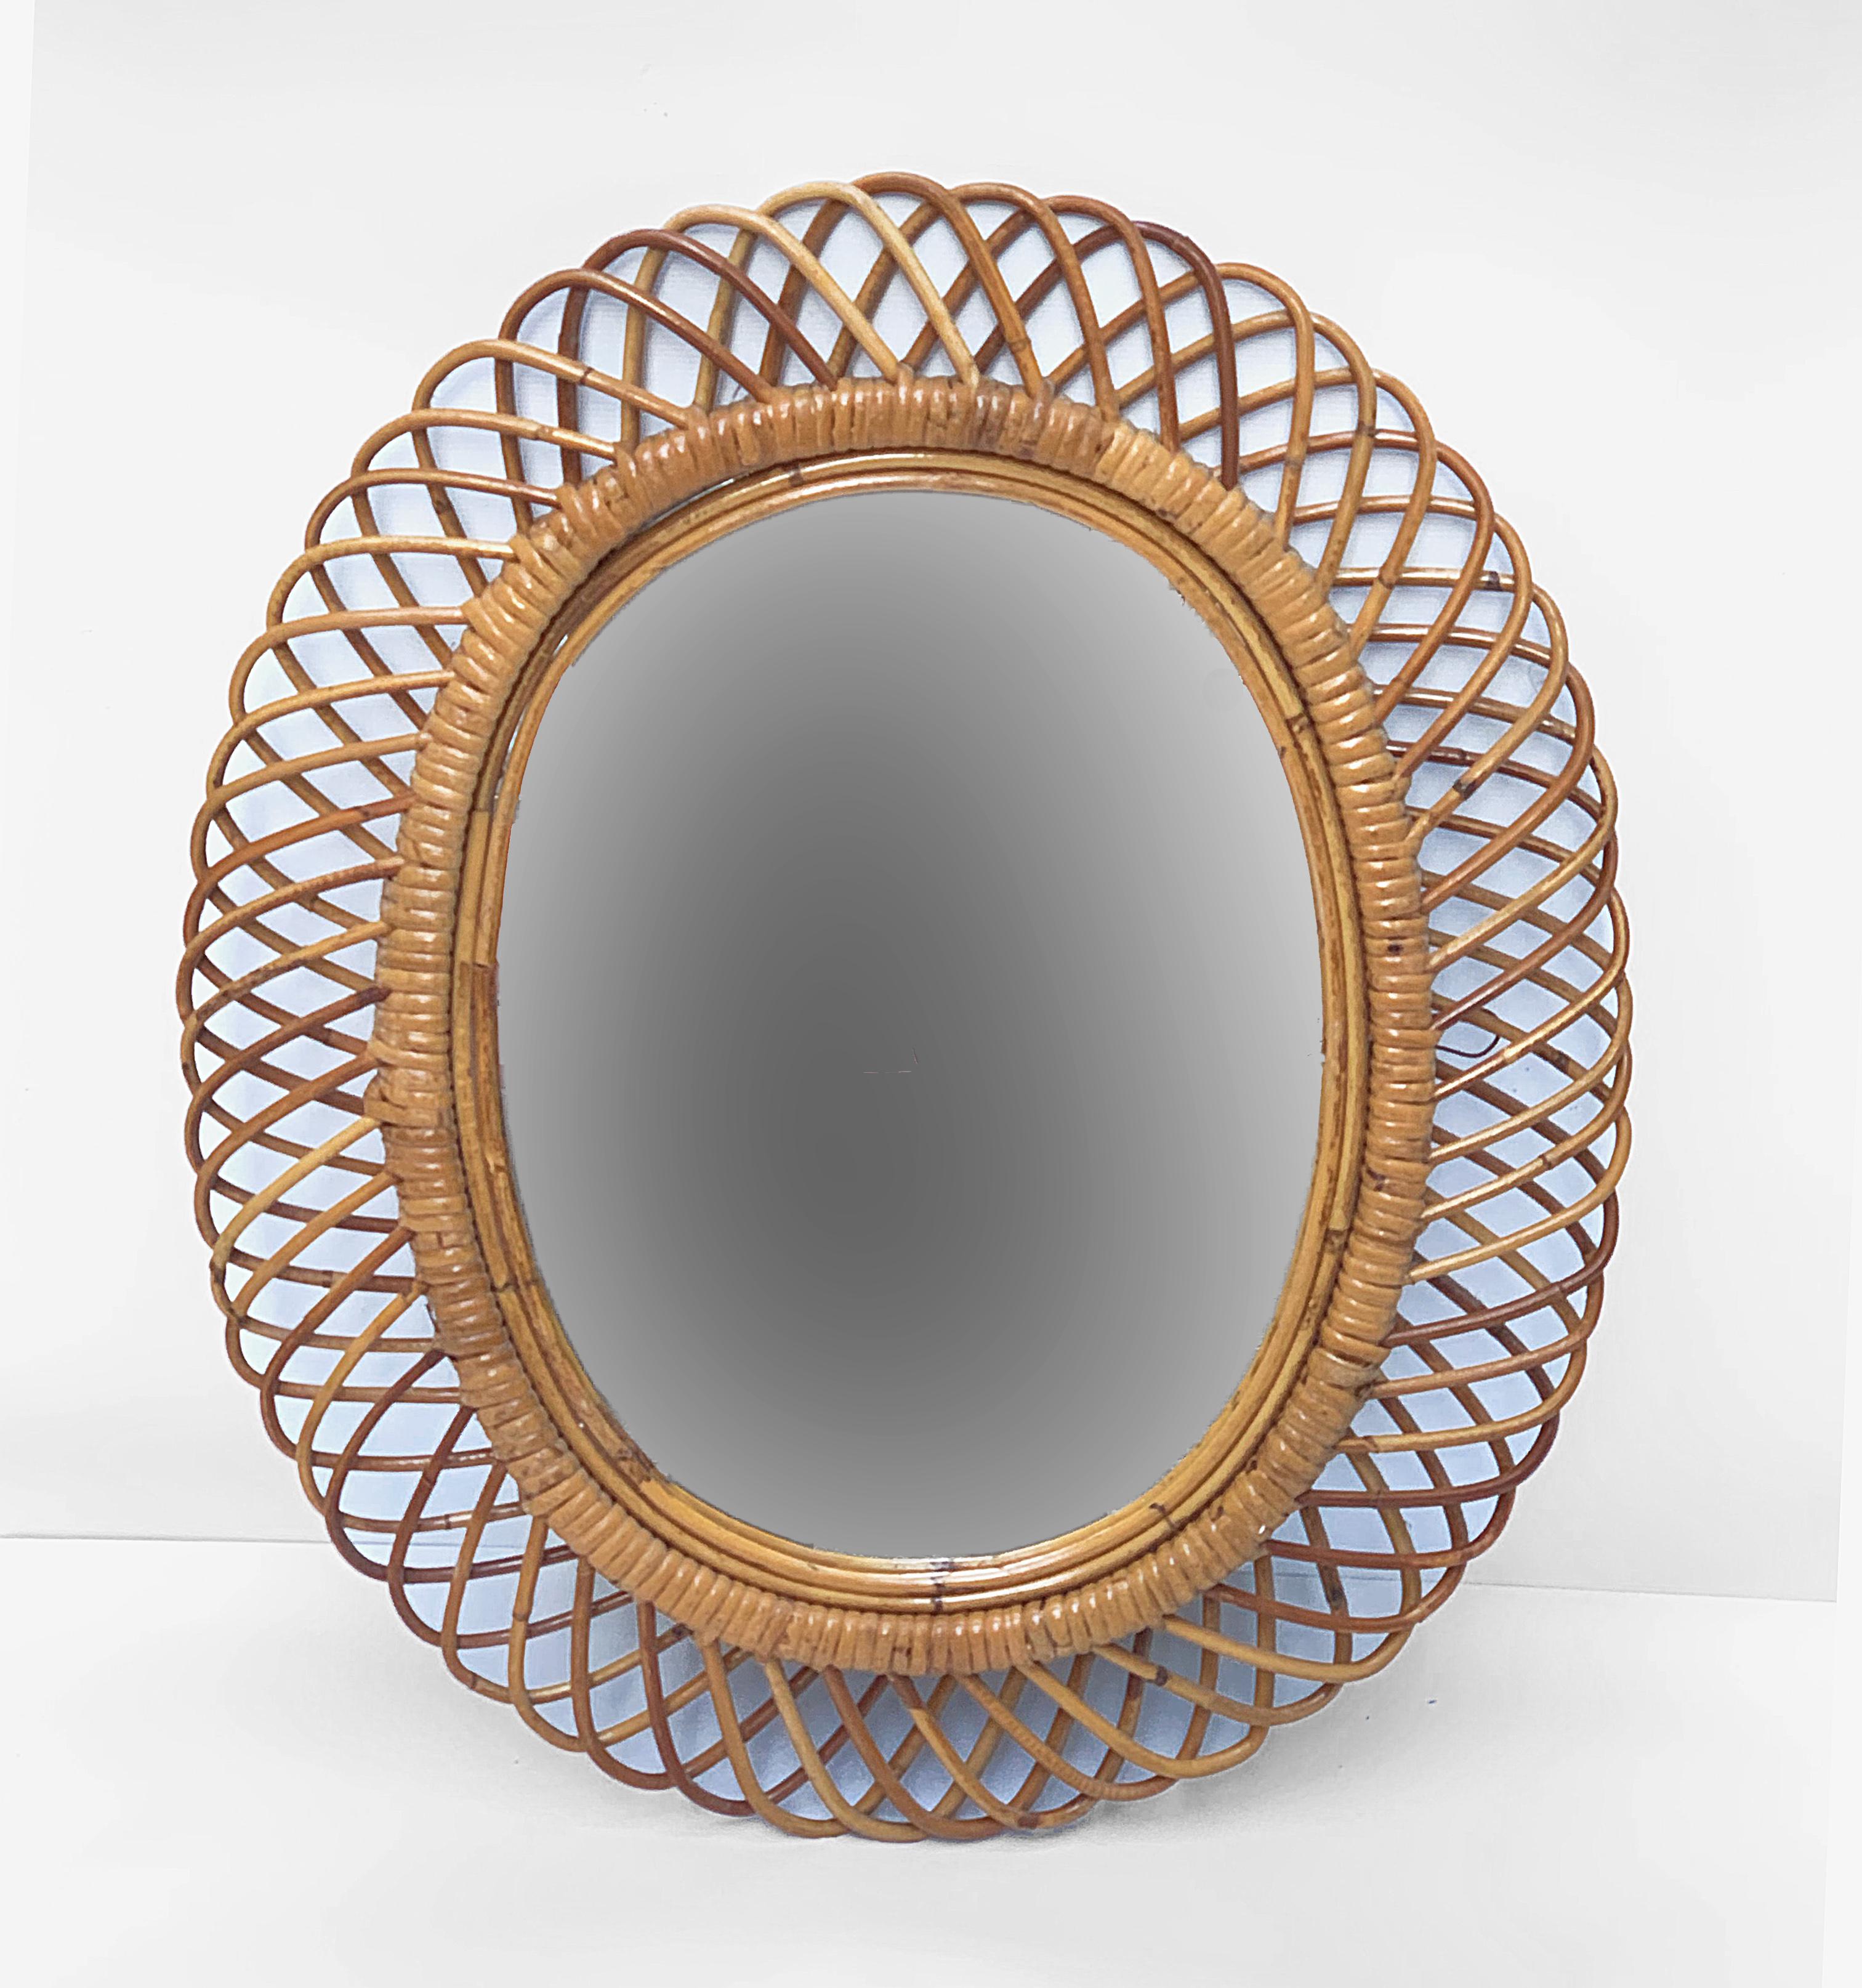 Very decorative oval mirror with curved rattan beams and bamboo frame.

This wonderful piece was produced in Italy during 1960s.

This amazing item would be perfect for a midcentury-style living room or bedroom.

Measurements (cms): 
Height